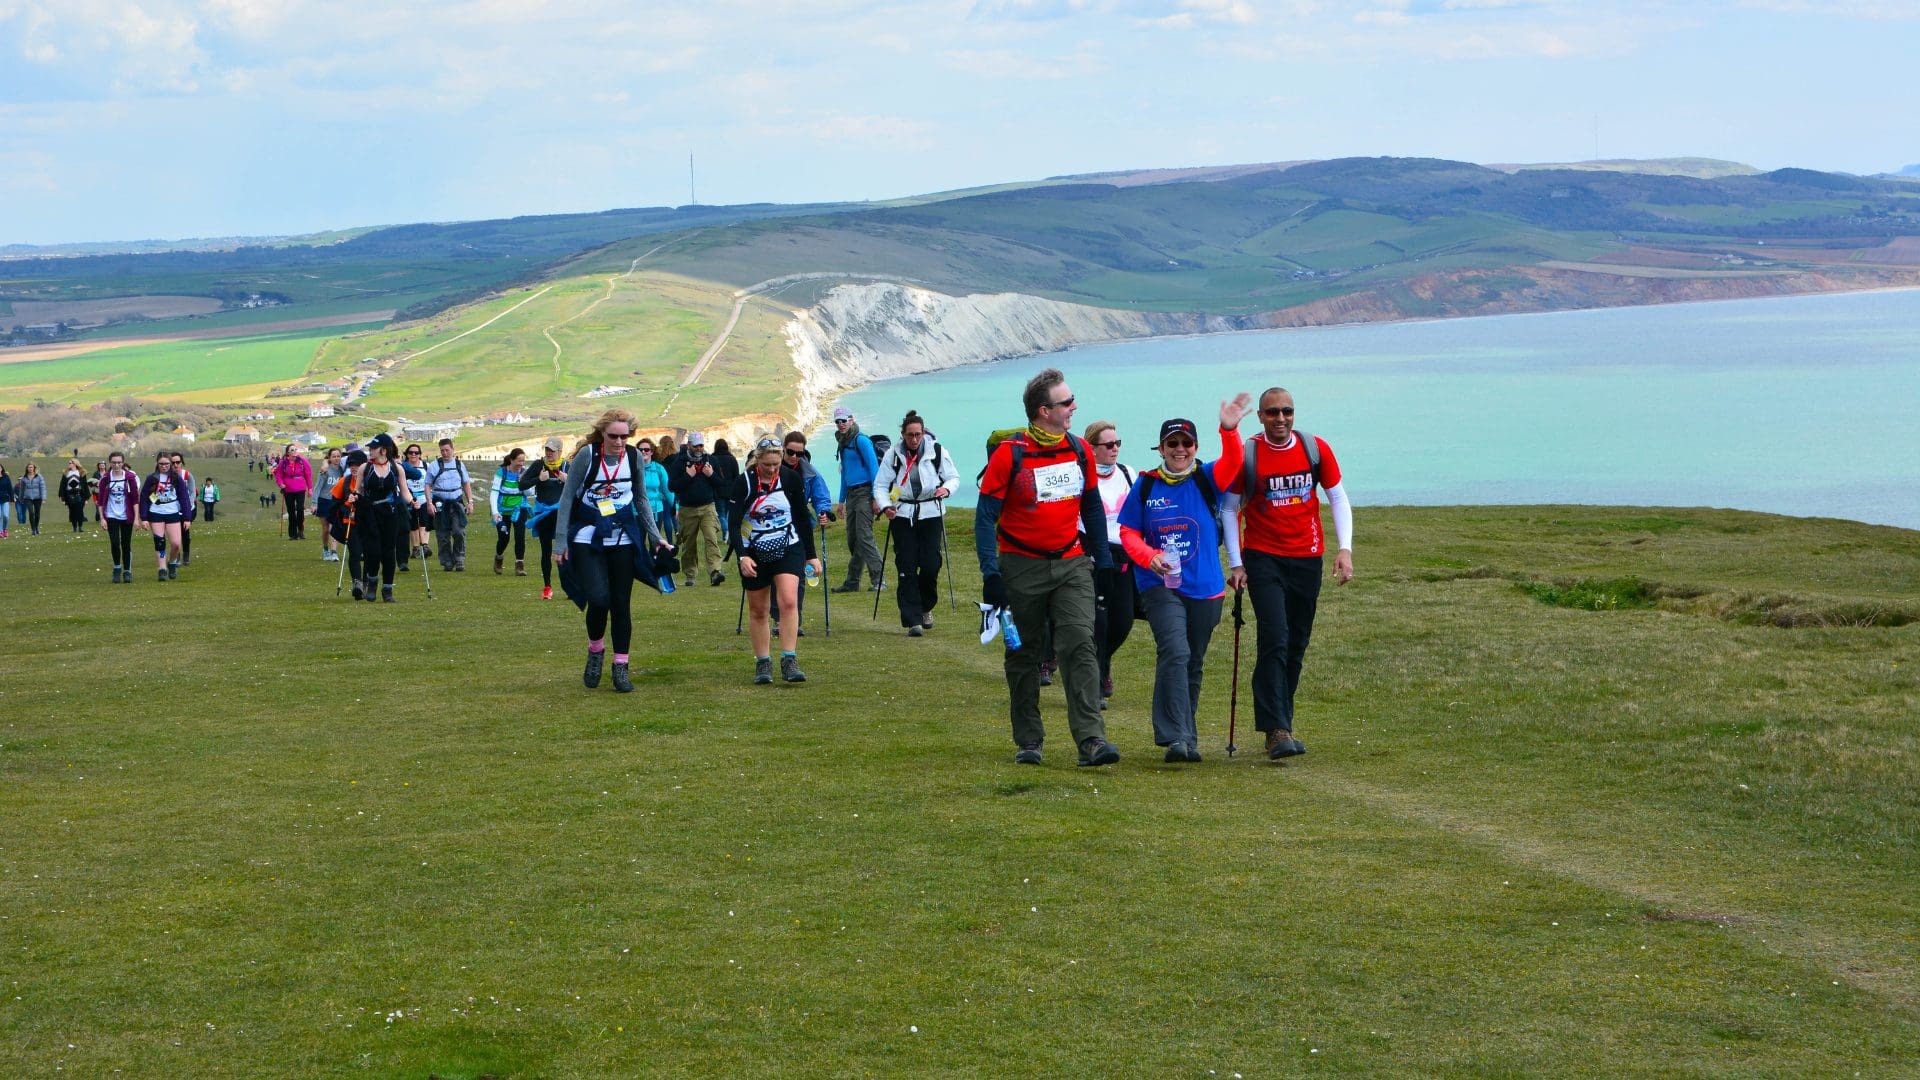 Large crowd of people walking along the Isle of Wight coastline